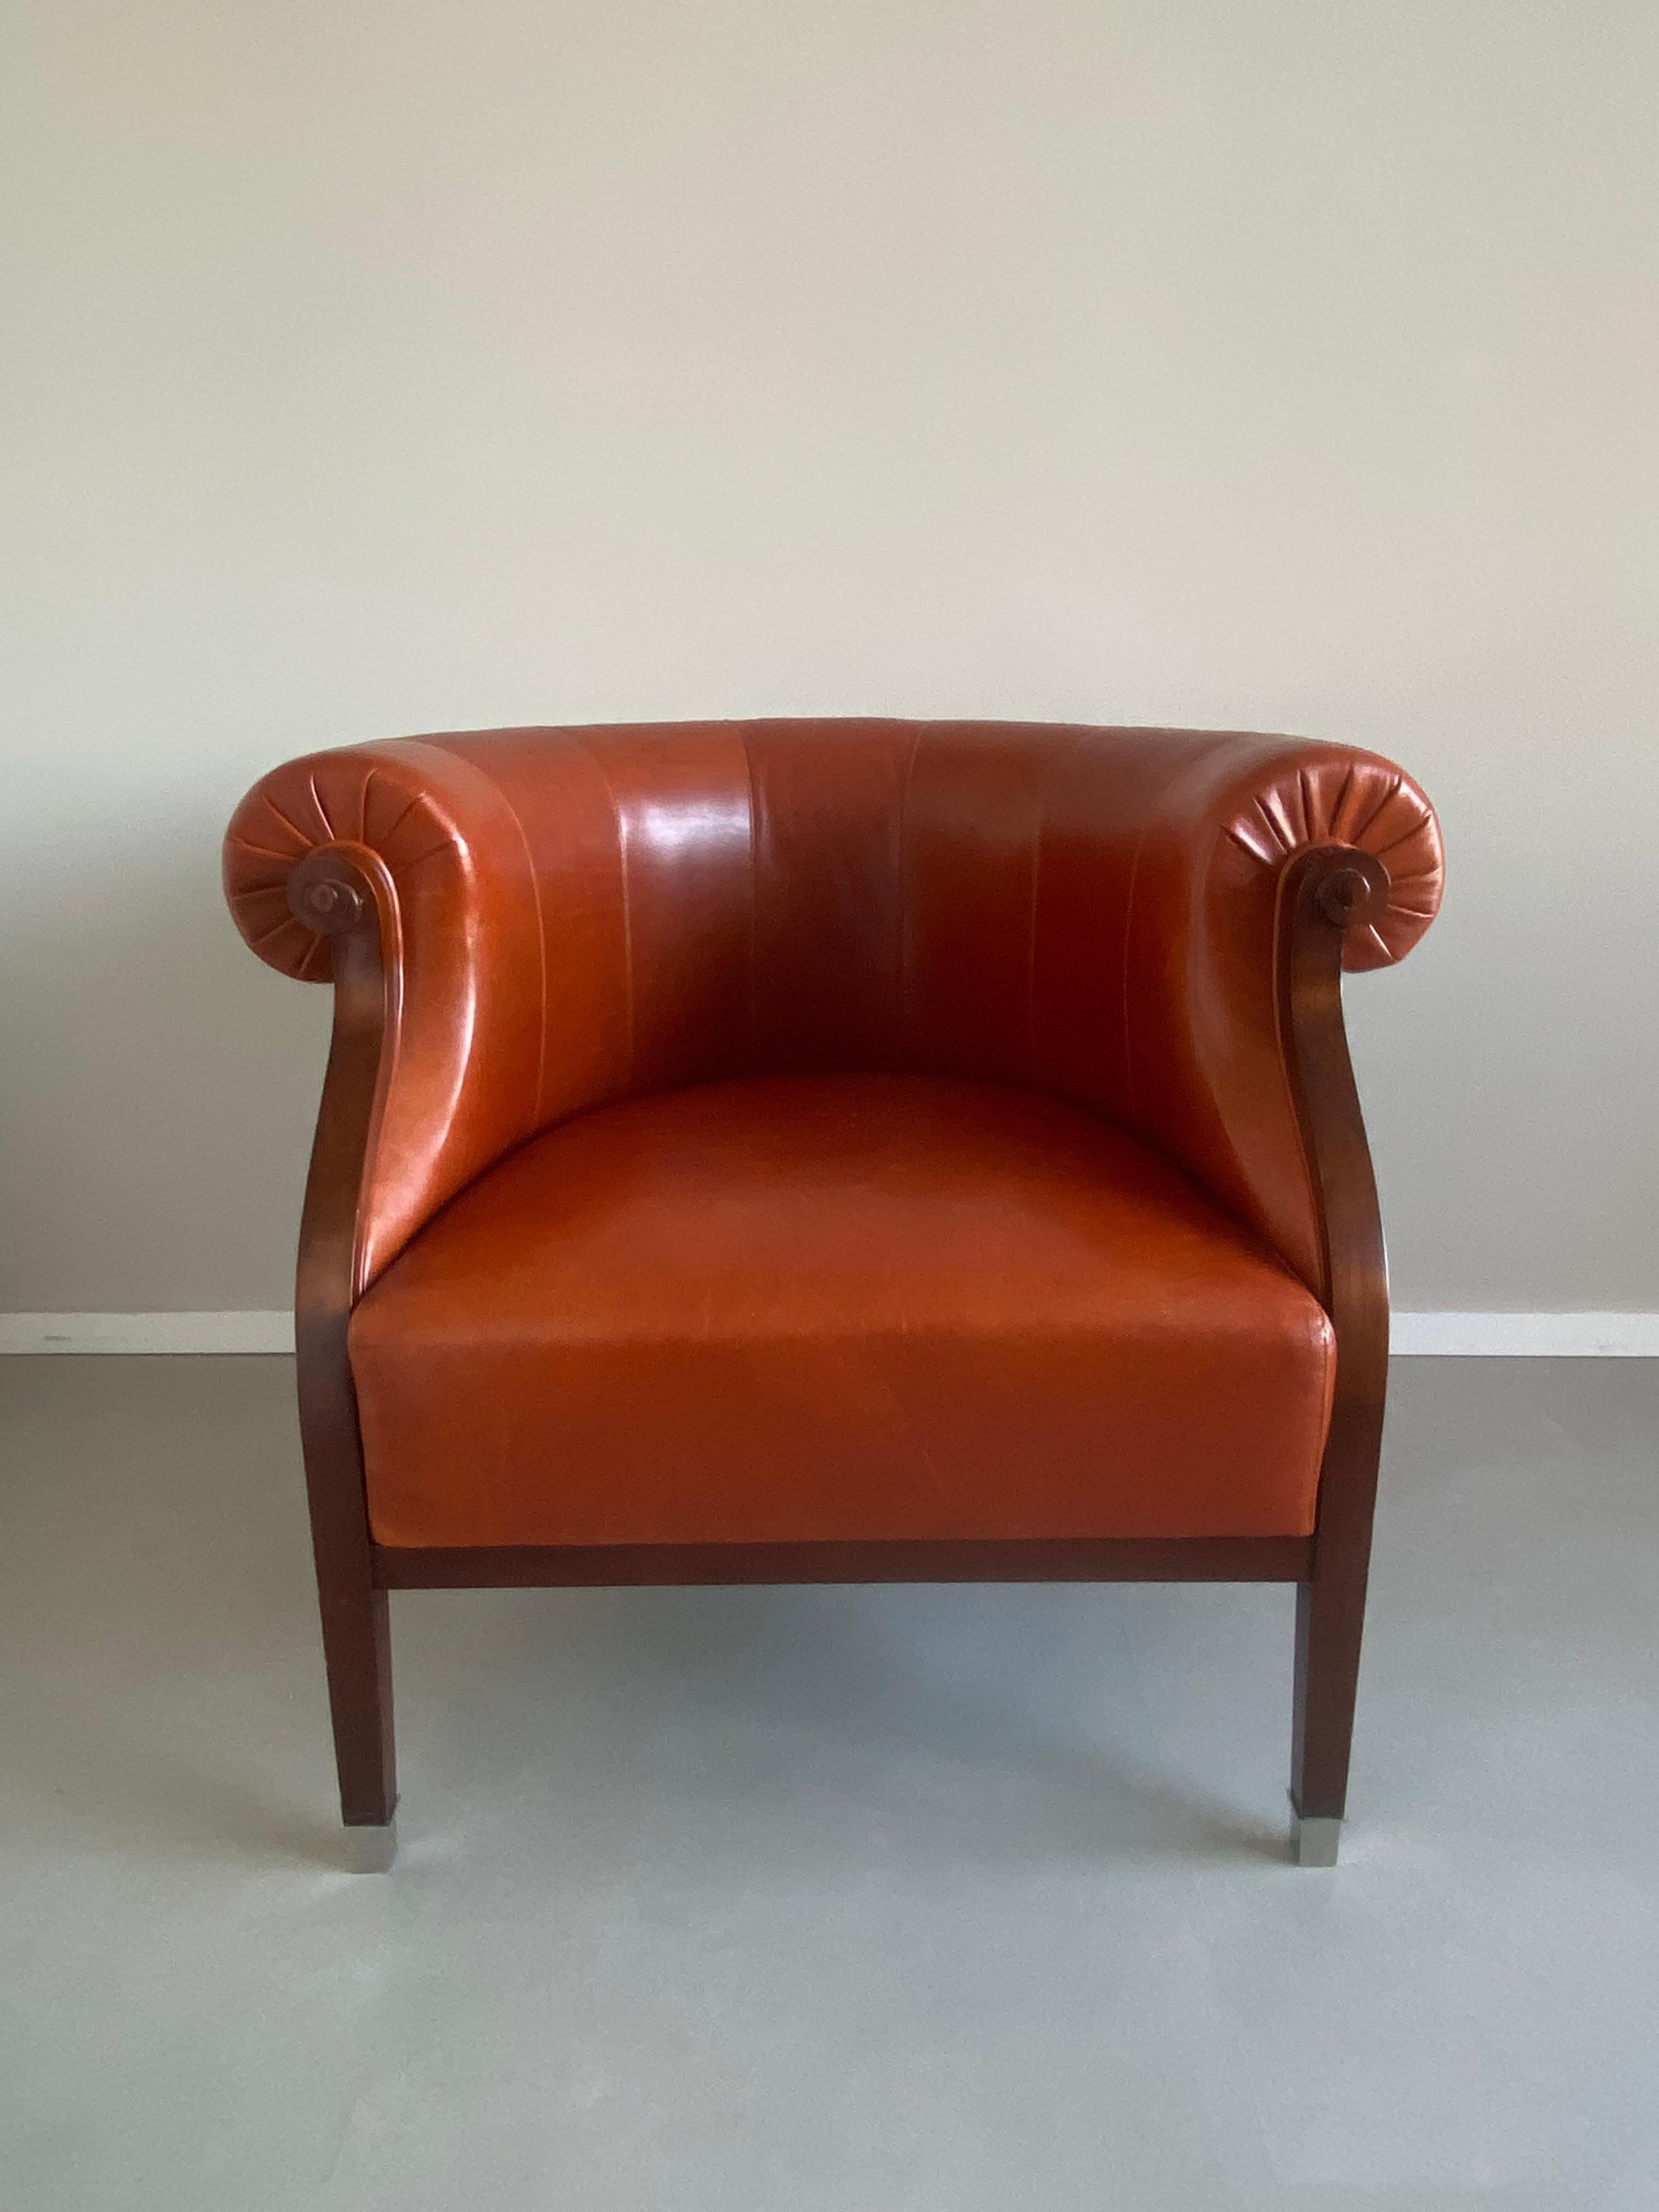 Elegant Italian armchair which was manufactured by the famous Annibale Colombo. The chair features a Cherrywood base, a Cognac colored leather seating, back and armrests and details as Stainless steel feet. This wonderful piece is in good condition